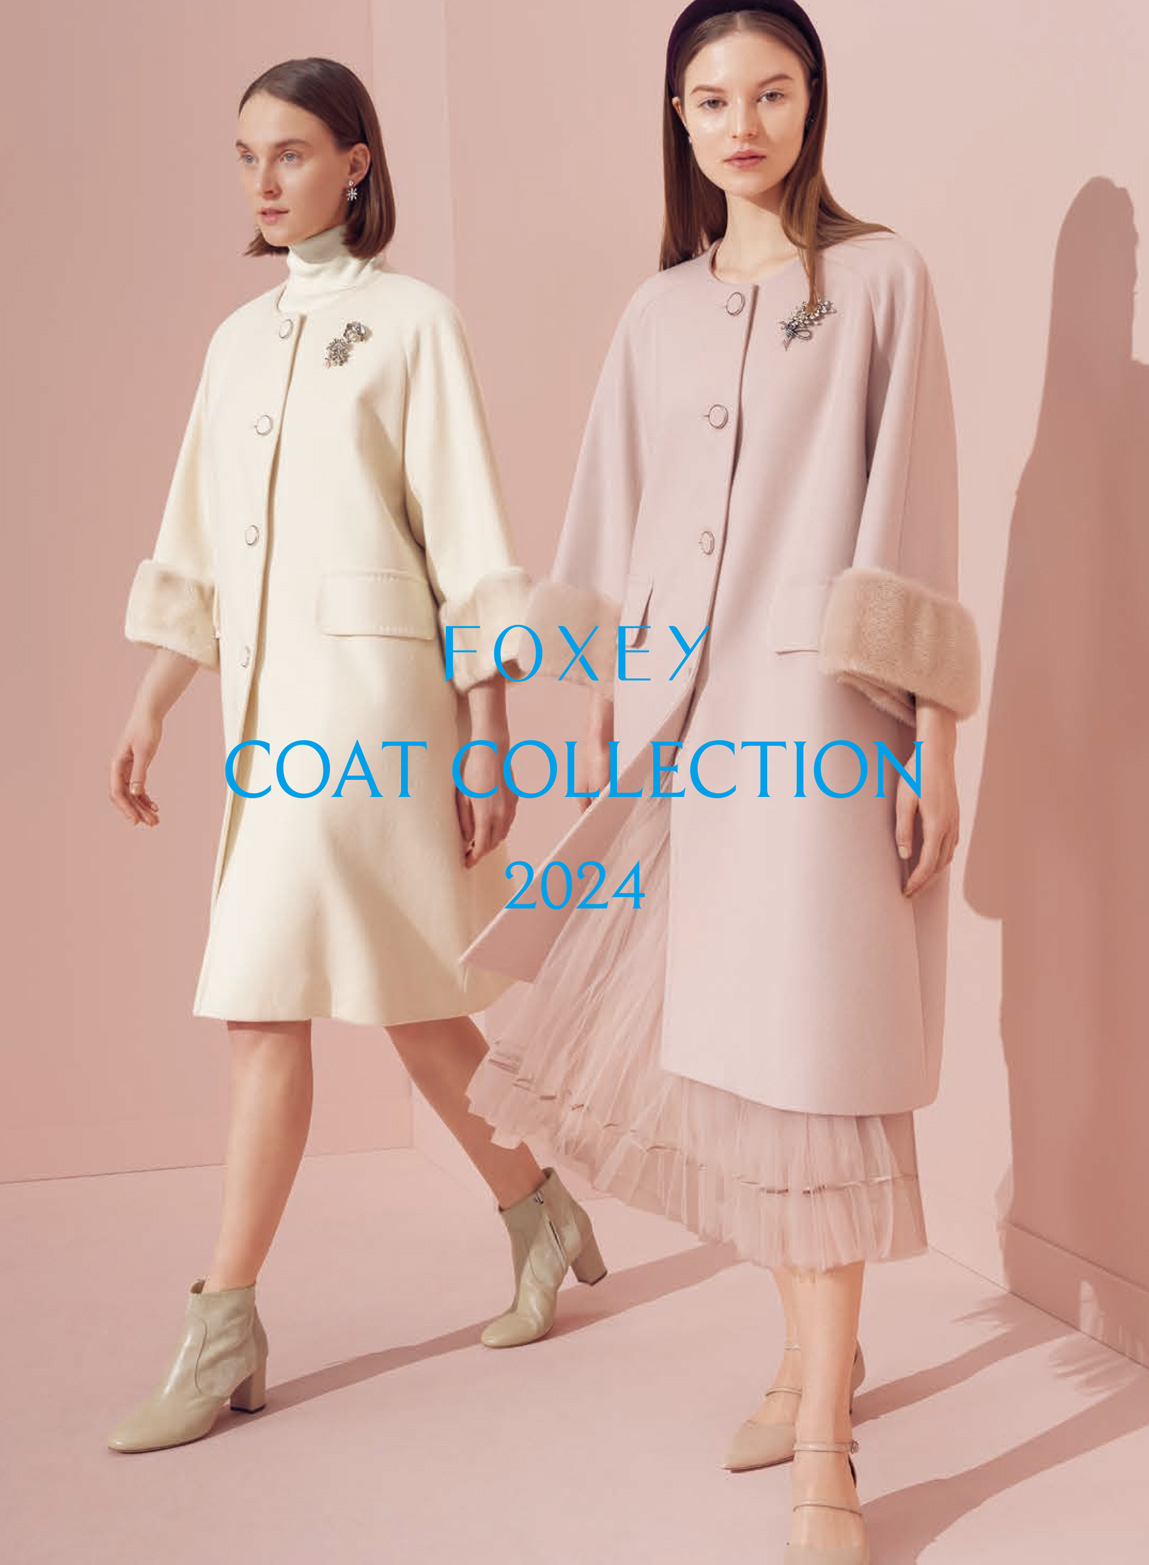 COAT COLLECTION 2024 | FOXEY